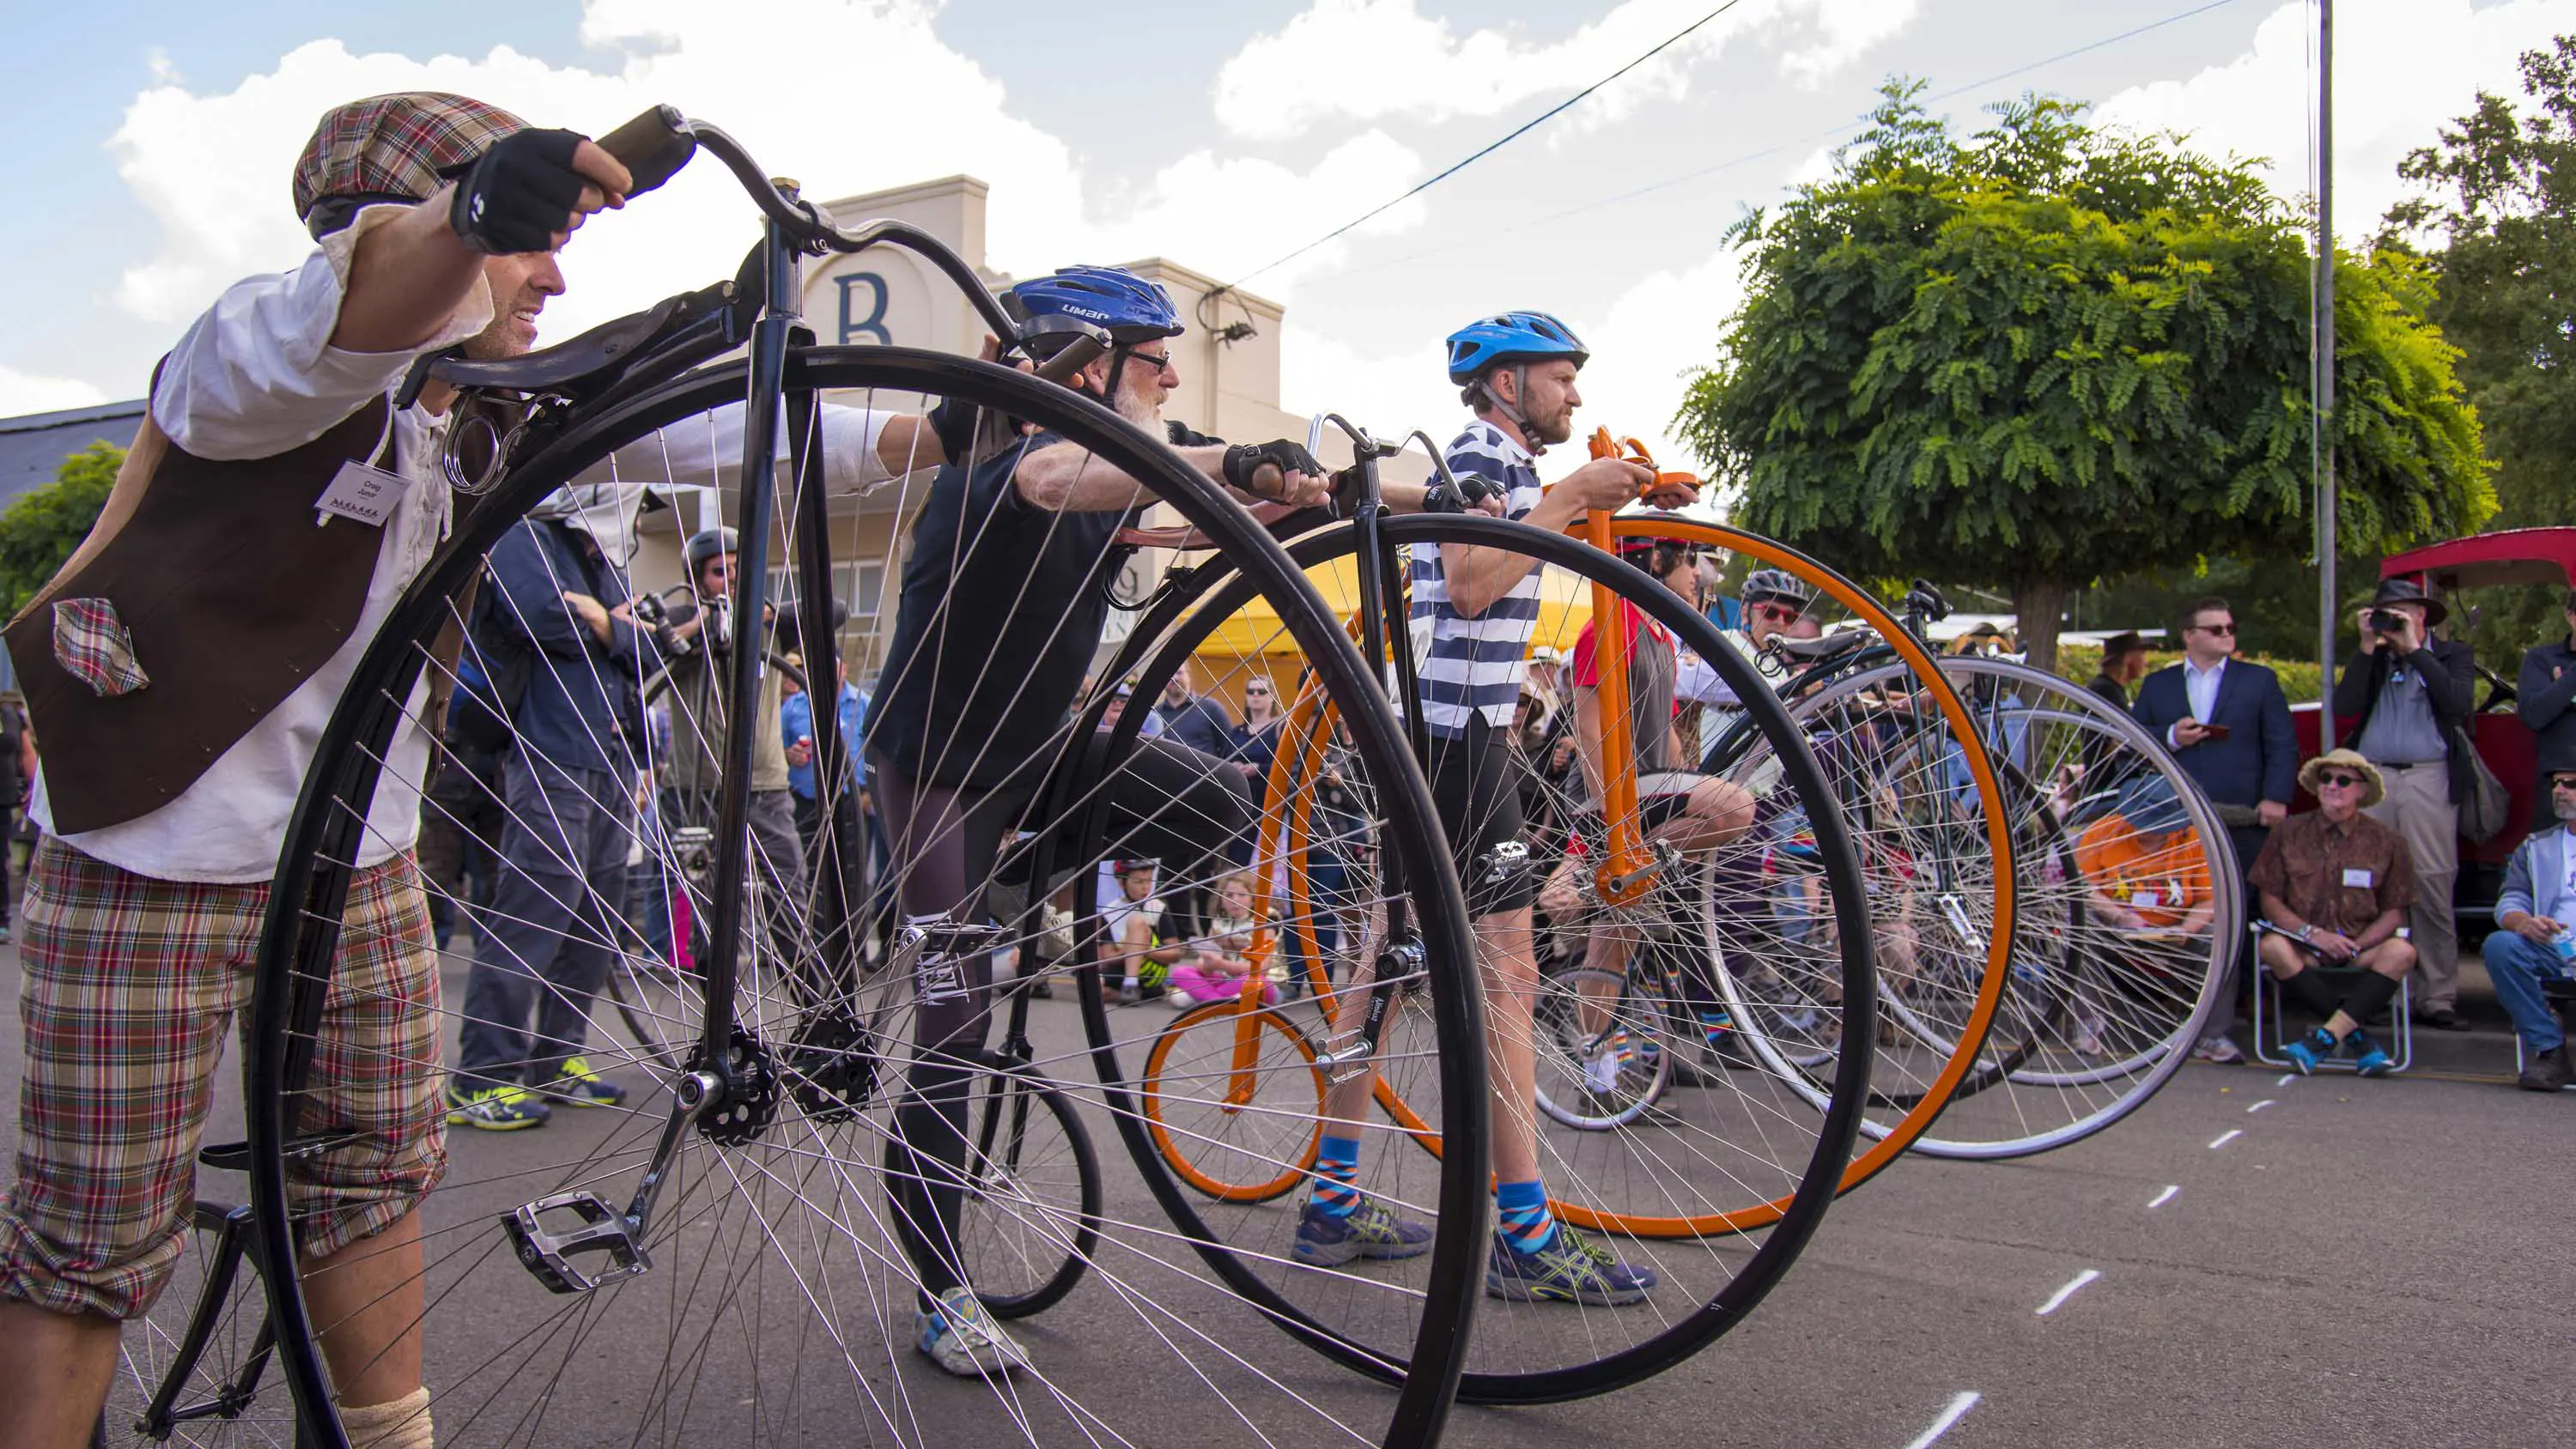 A group of penny farthing racers line up at the start line next to their bikes.